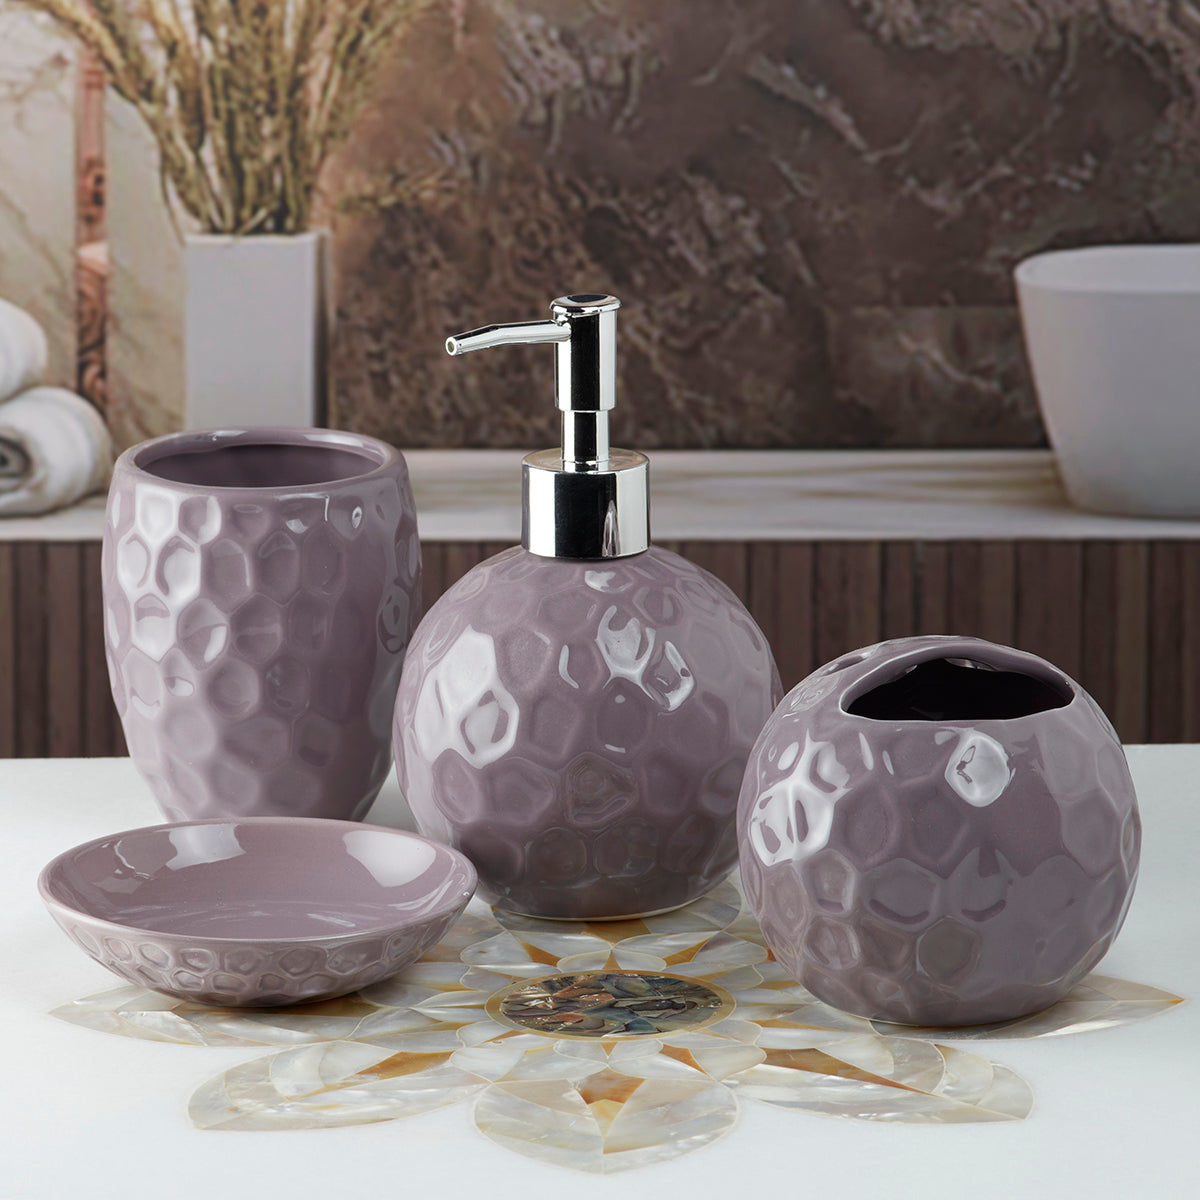 Kookee Ceramic Bathroom Accessories Set of 4, Modern Bath Set with Liquid handwash Soap Dispenser and Toothbrush holder, Luxury Gift Accessory for Home, Purple (8204)